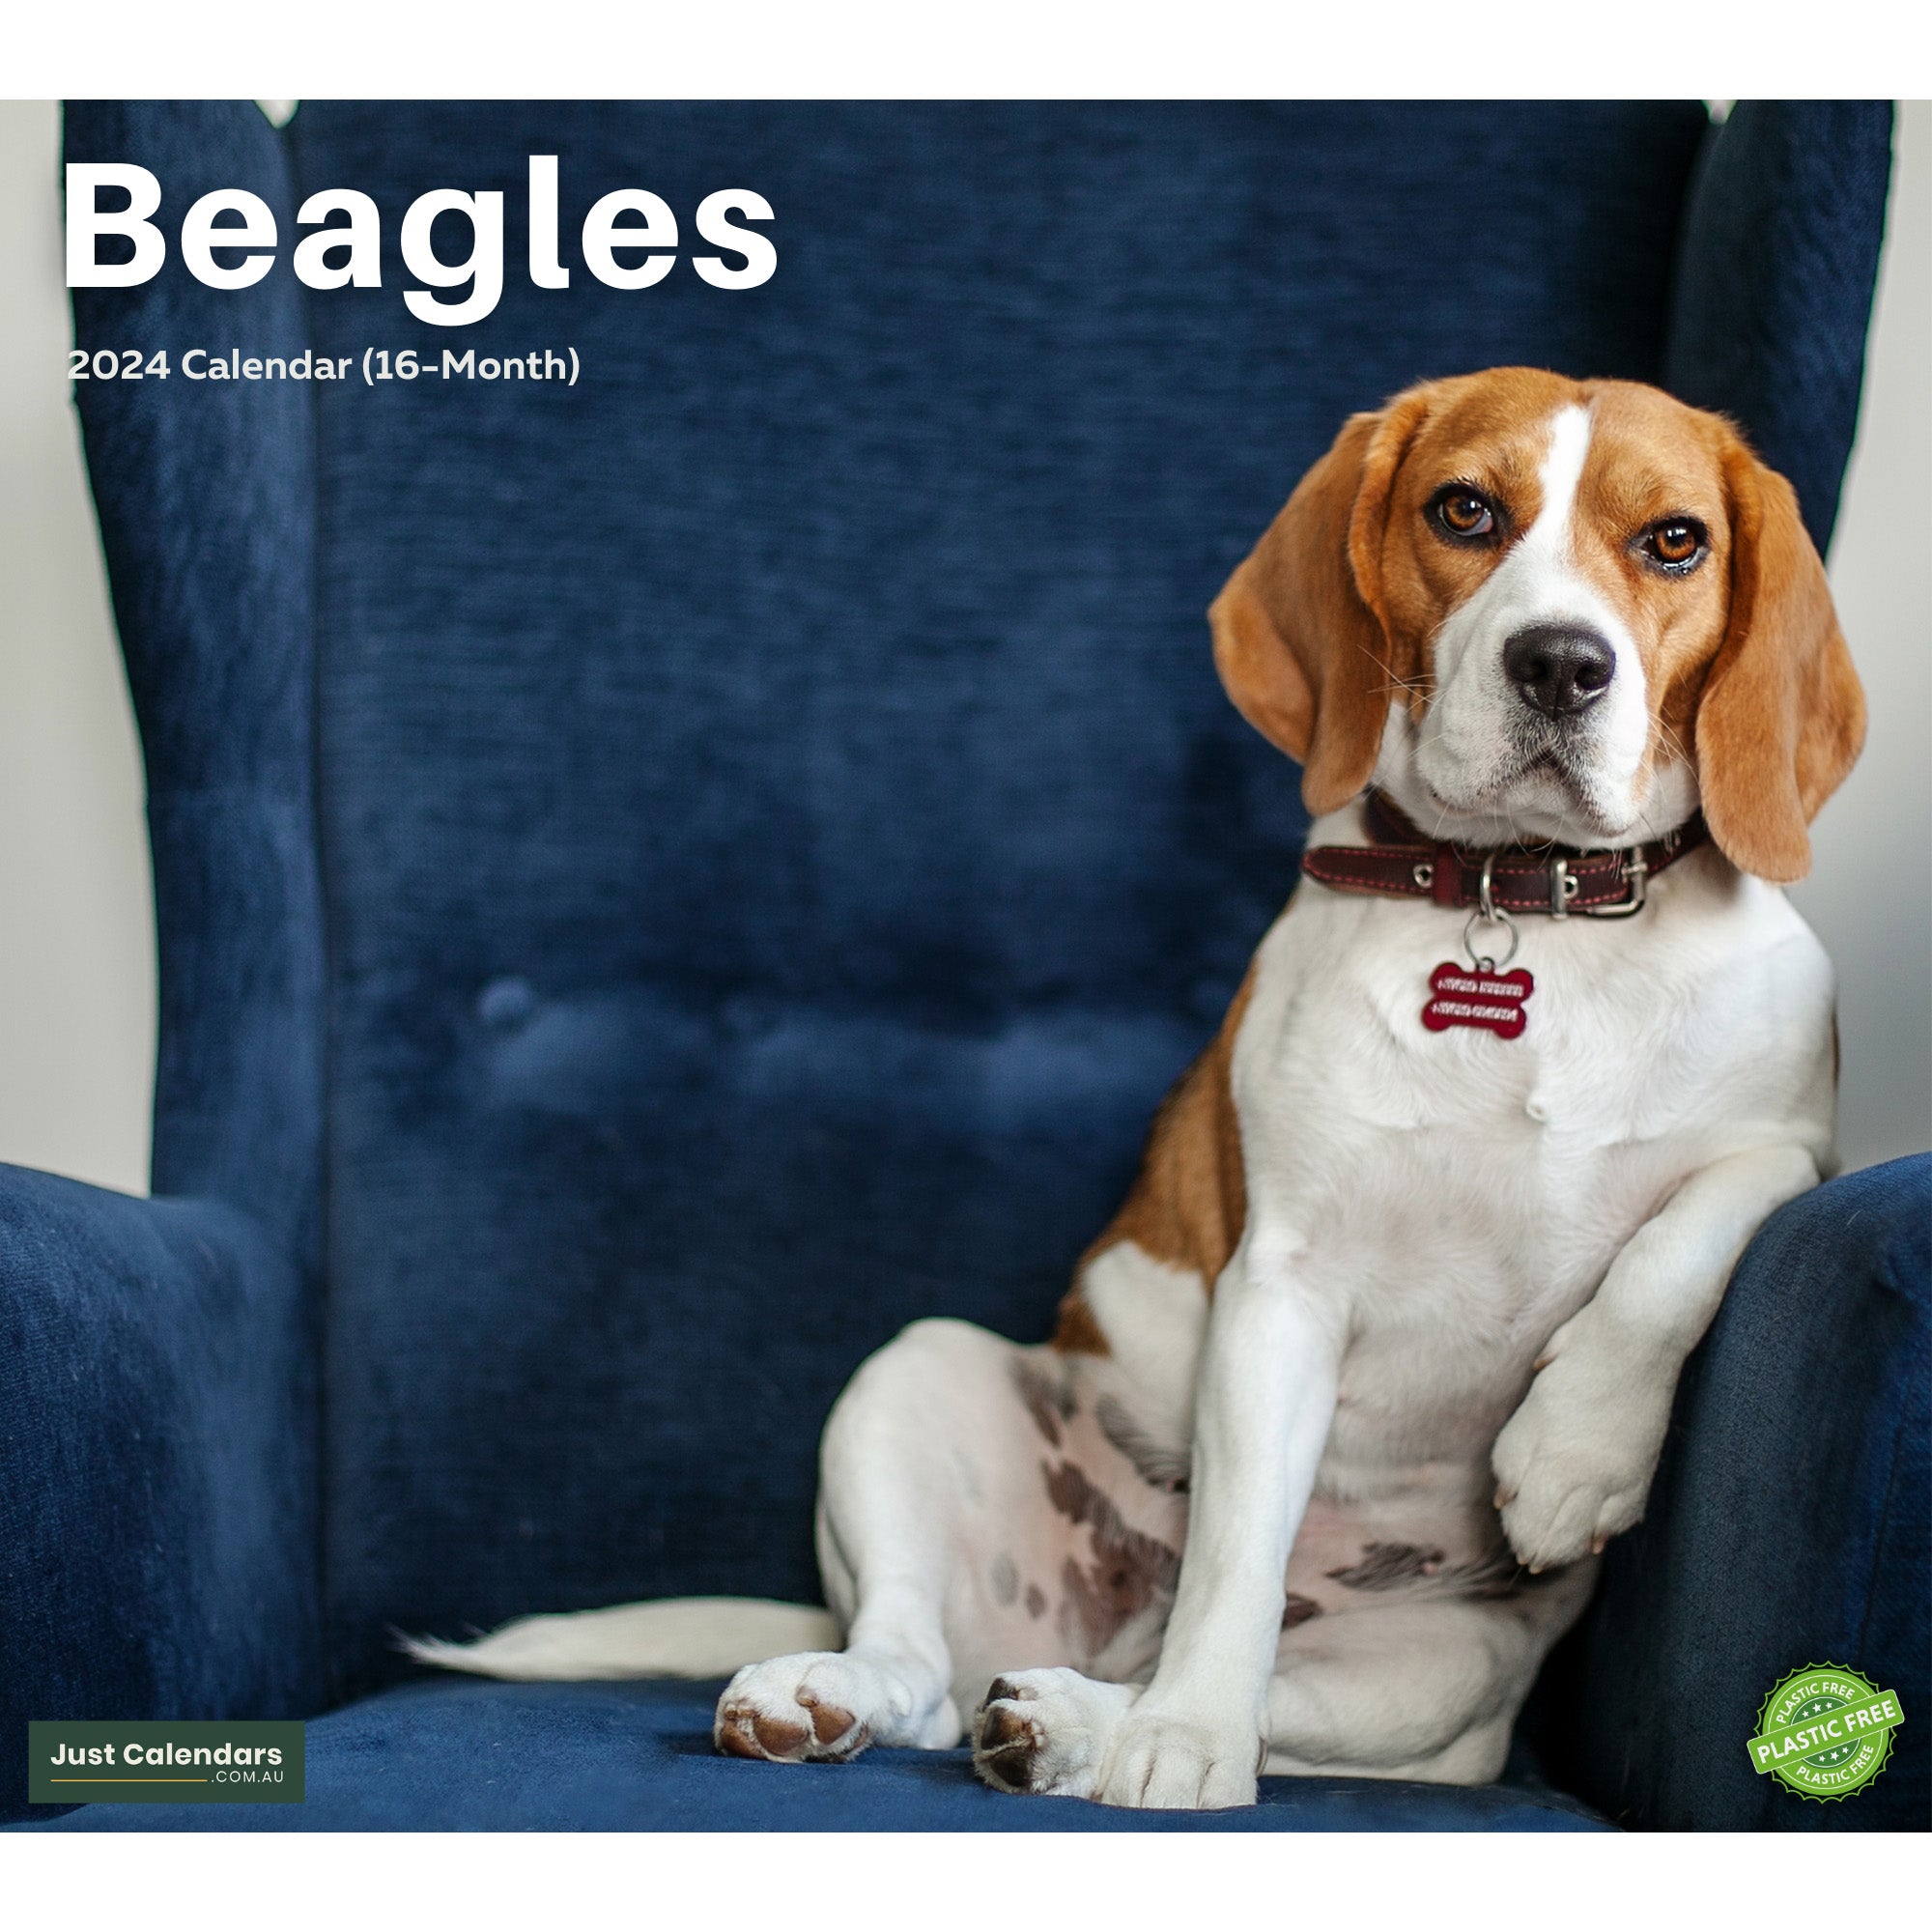 2024 Beagles Deluxe Wall Calendar Dogs & Puppies Calendars By Just